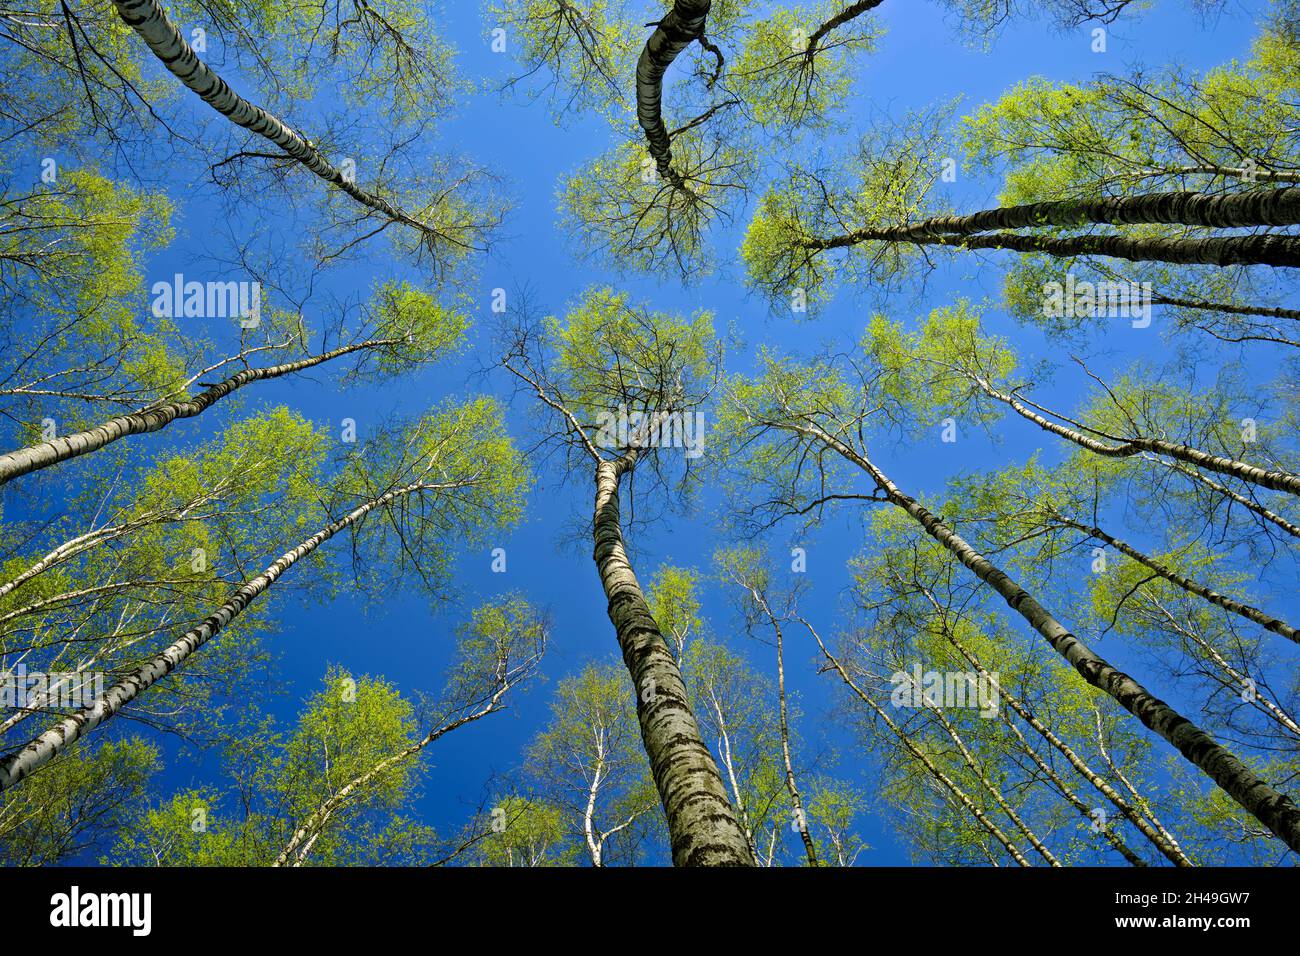 View from below of white birch trees coming into leaf in spring. Bitsevski Park (Bitsa Park), Moscow, Russia. Stock Photo